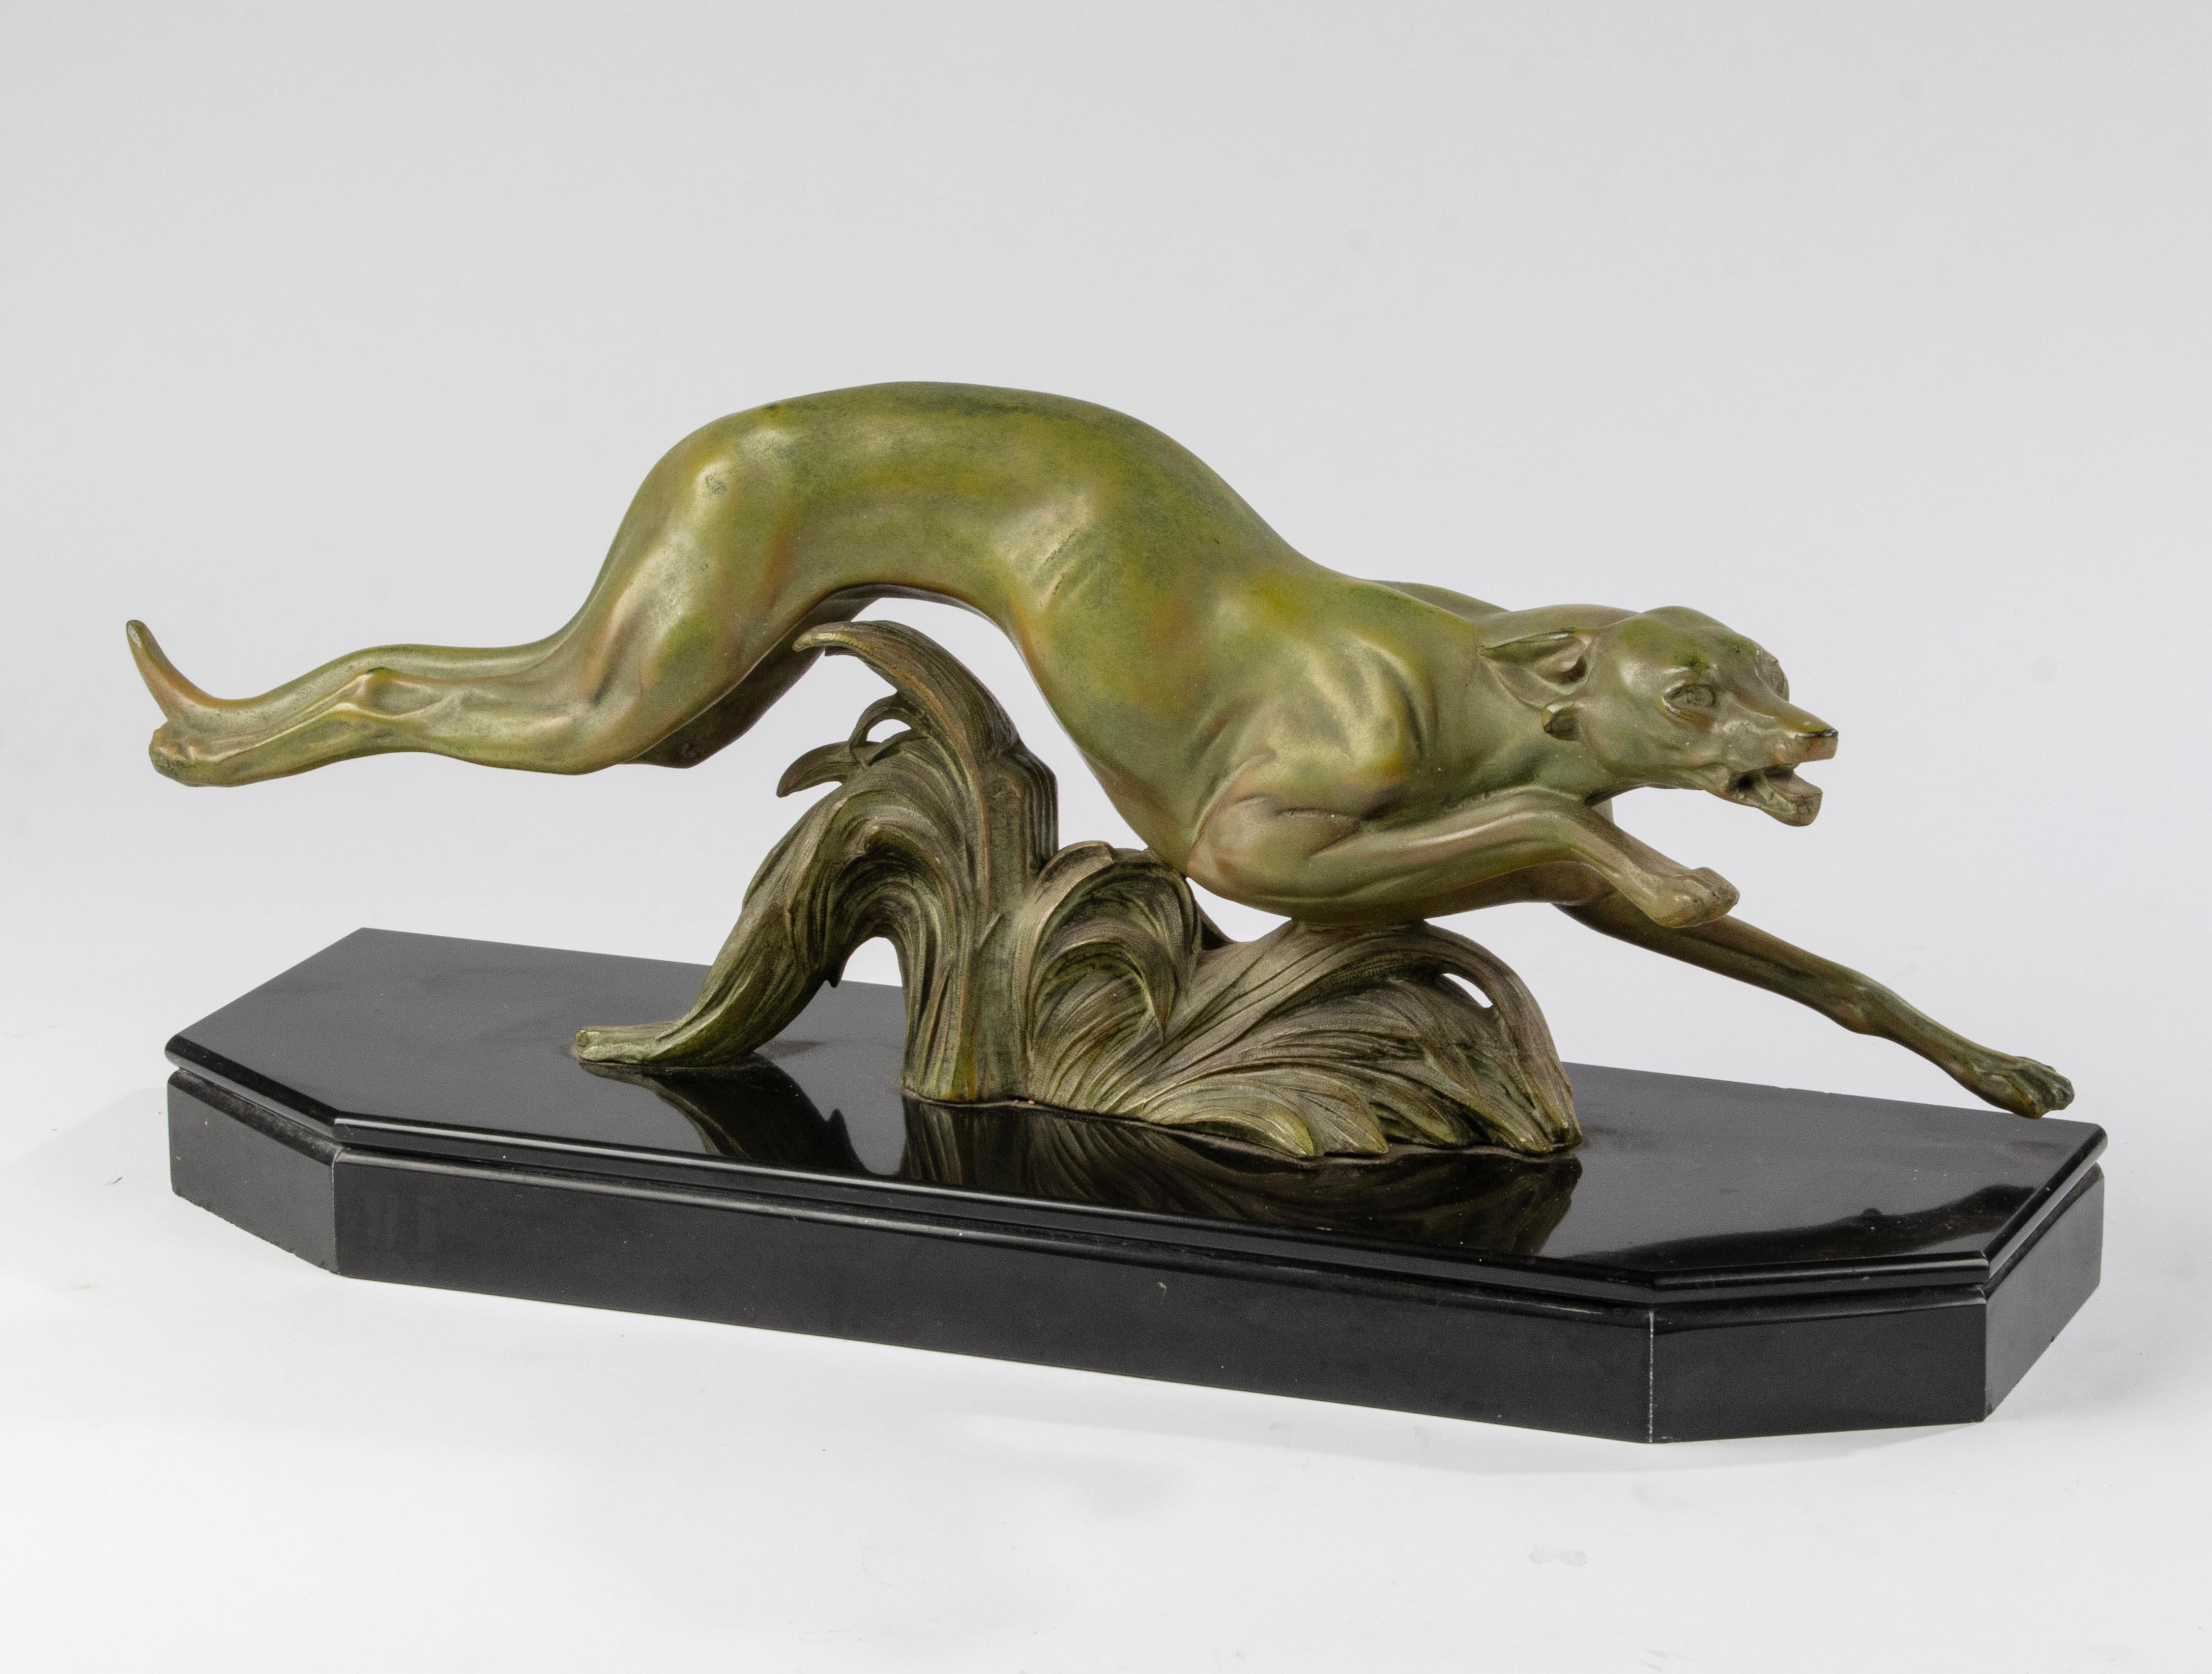 A graceful sculpture of a Greyhound / Whippet dog. The dog figurine is made of green patinated spelter (zinc alloy). On a black Belgian marble hexagonal plint. Signed on the back: France. Artist unknown.
Dimensions: 23 (h) x 58 x 17 cm
Free shipping